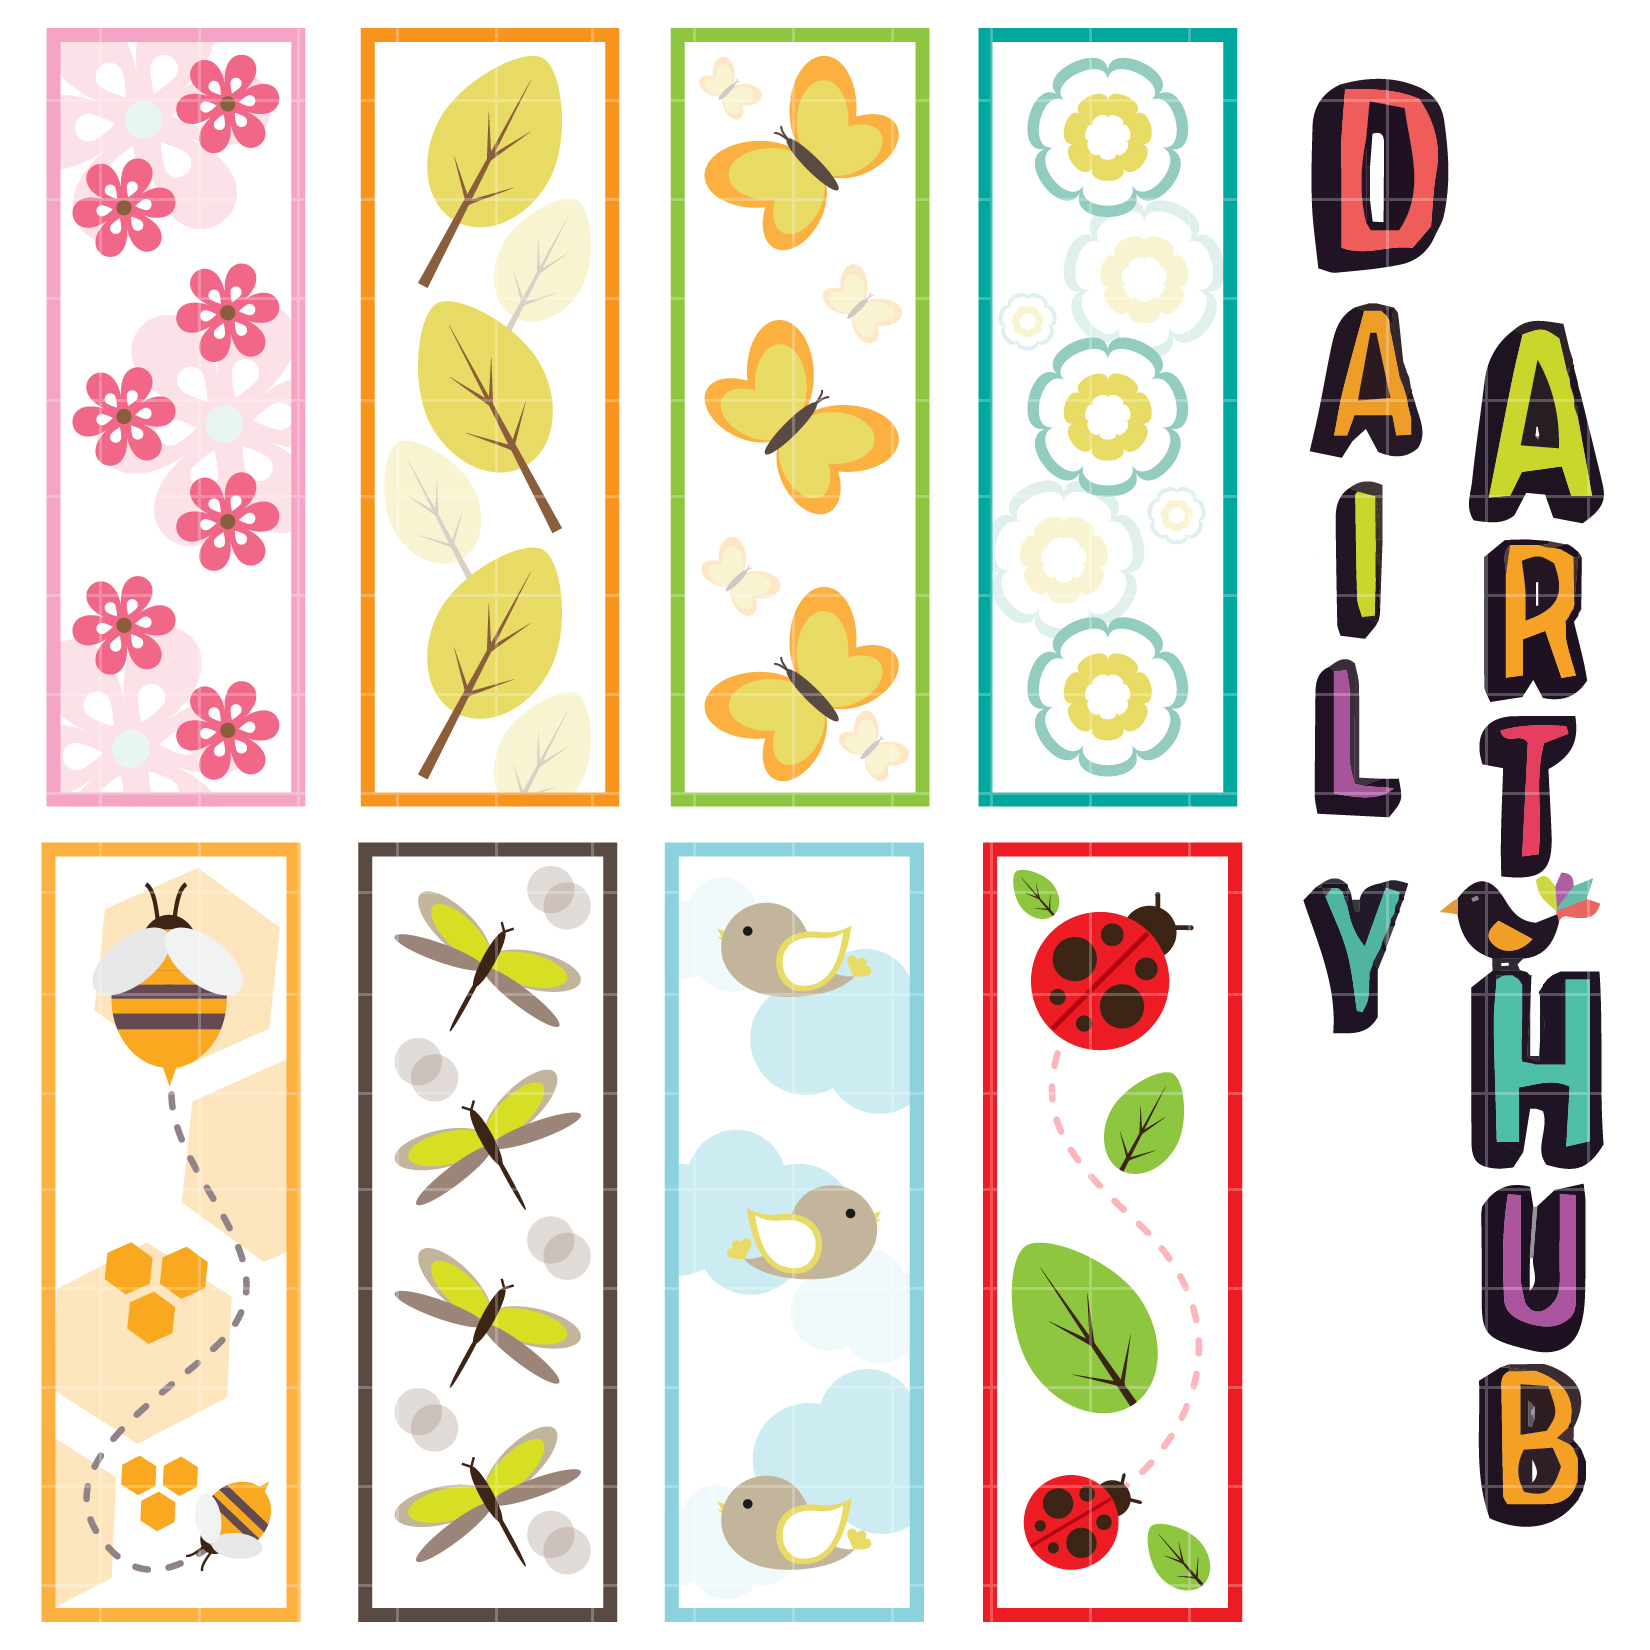 printable-cute-bookmarks-for-kids-101-activity-printable-bookmarks